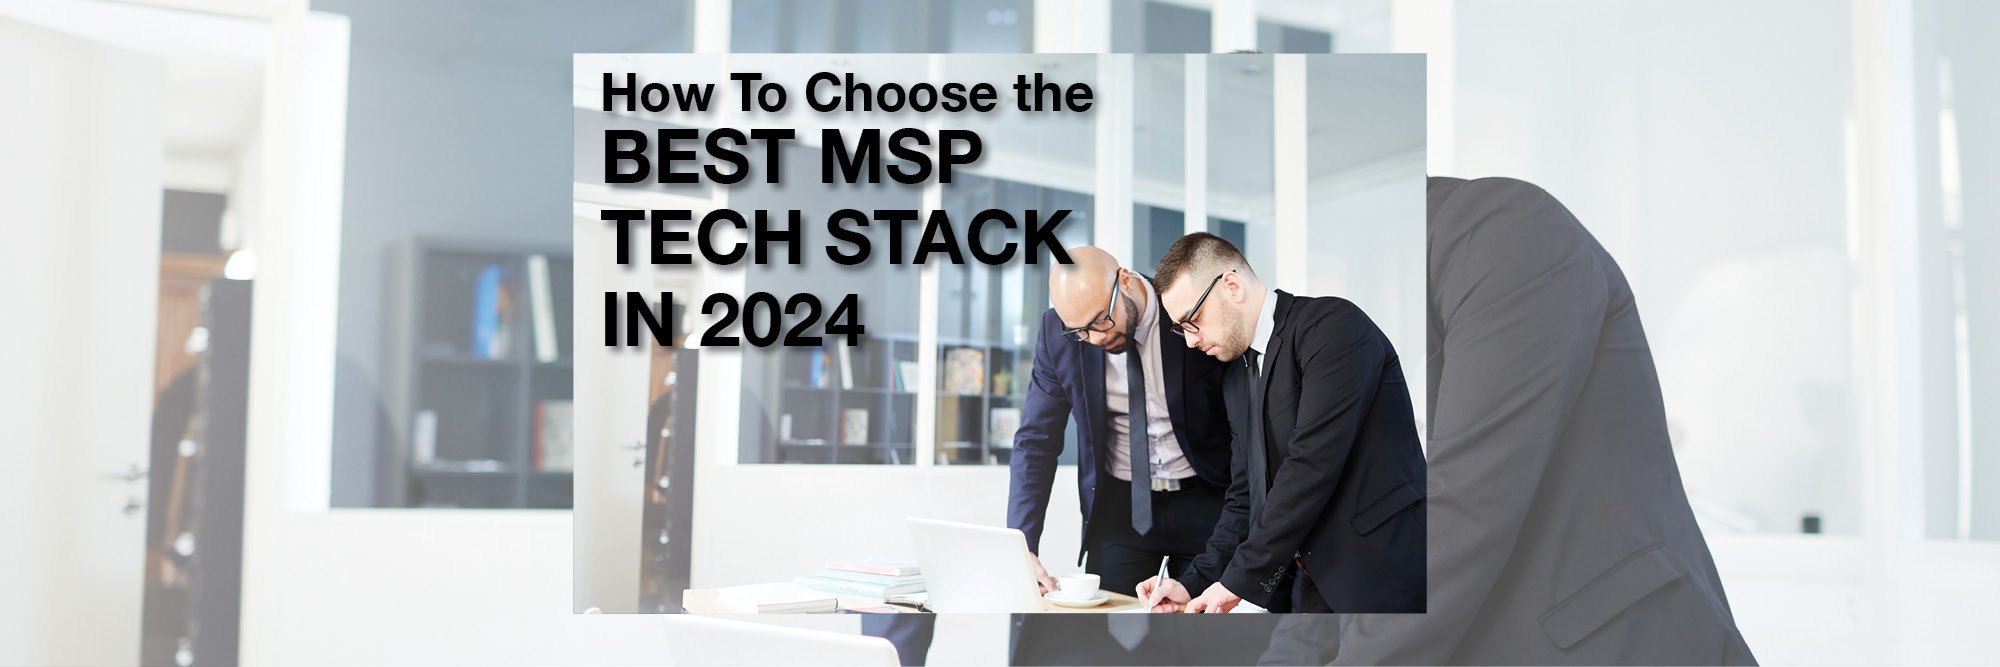 How To Choose the Best MSP Tech Stack in 2024